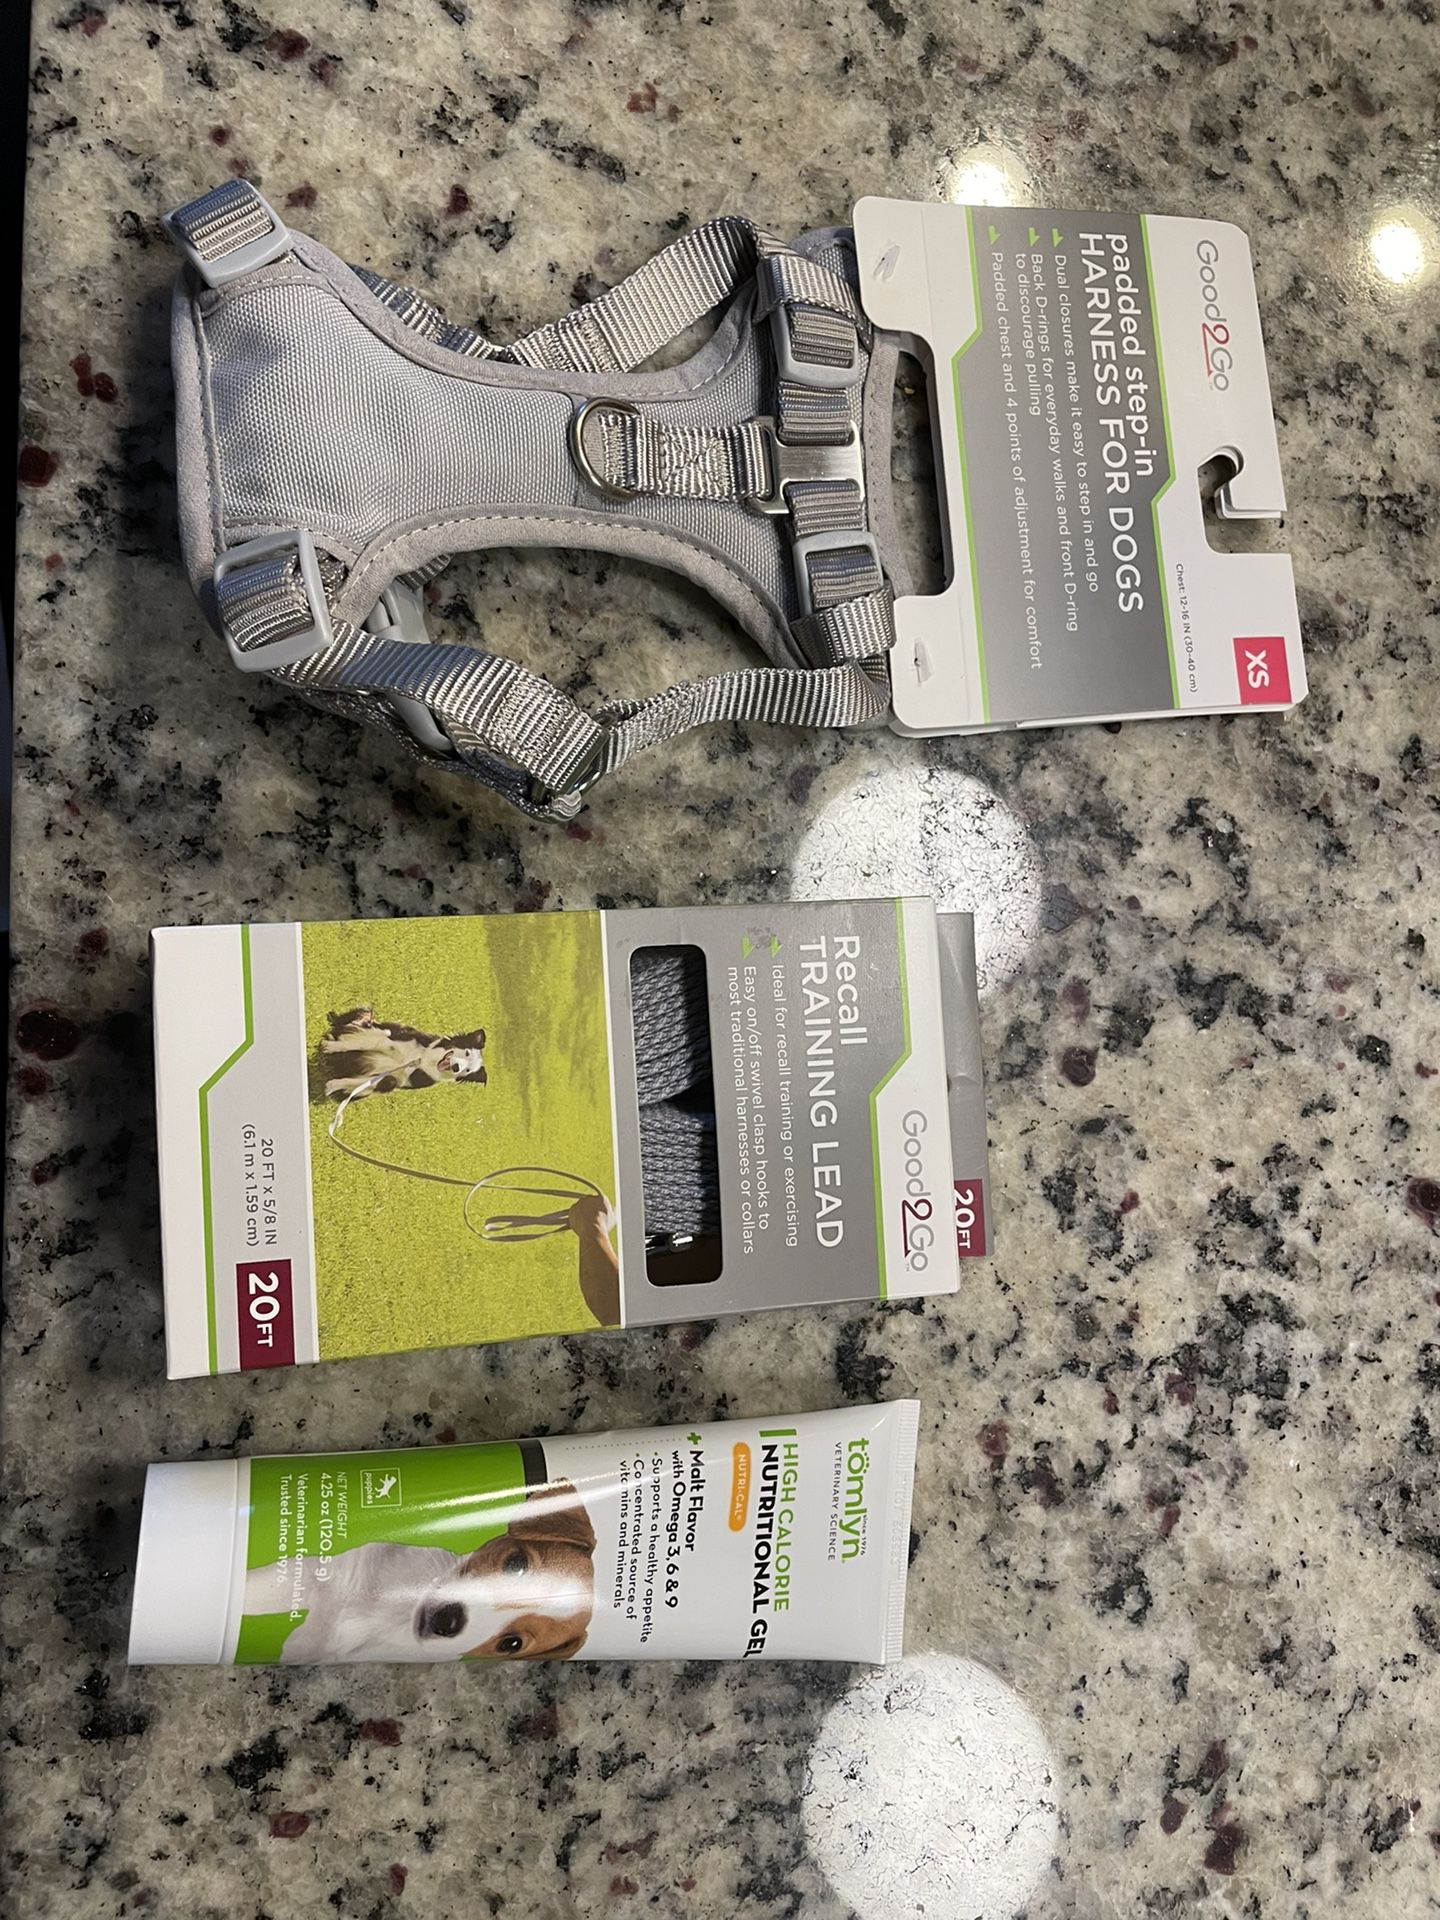 XS dog harness, training lead and nutritional paste